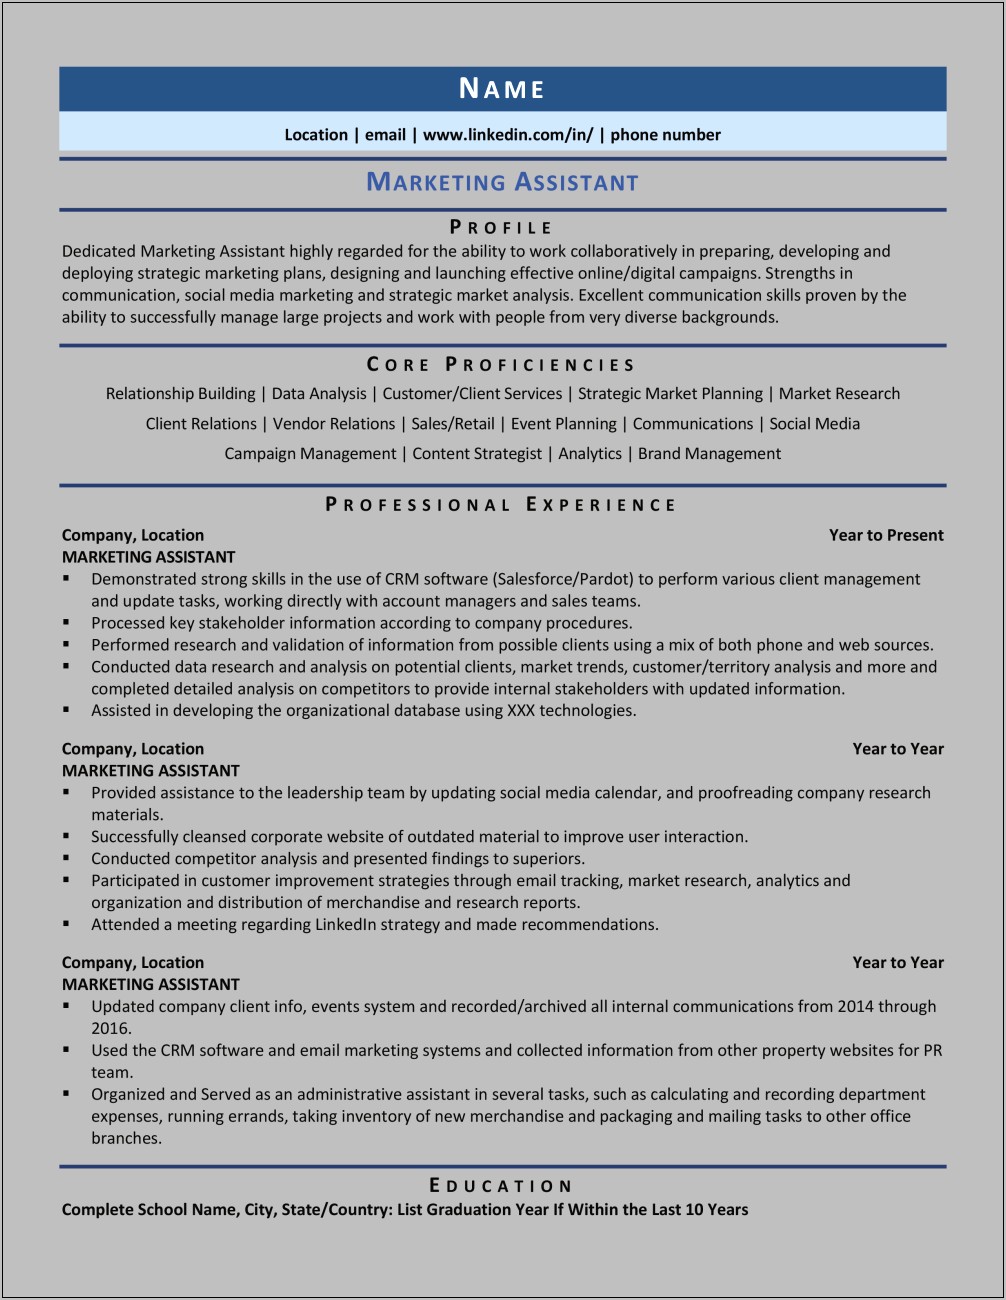 Communications And Marketing Resume Objective